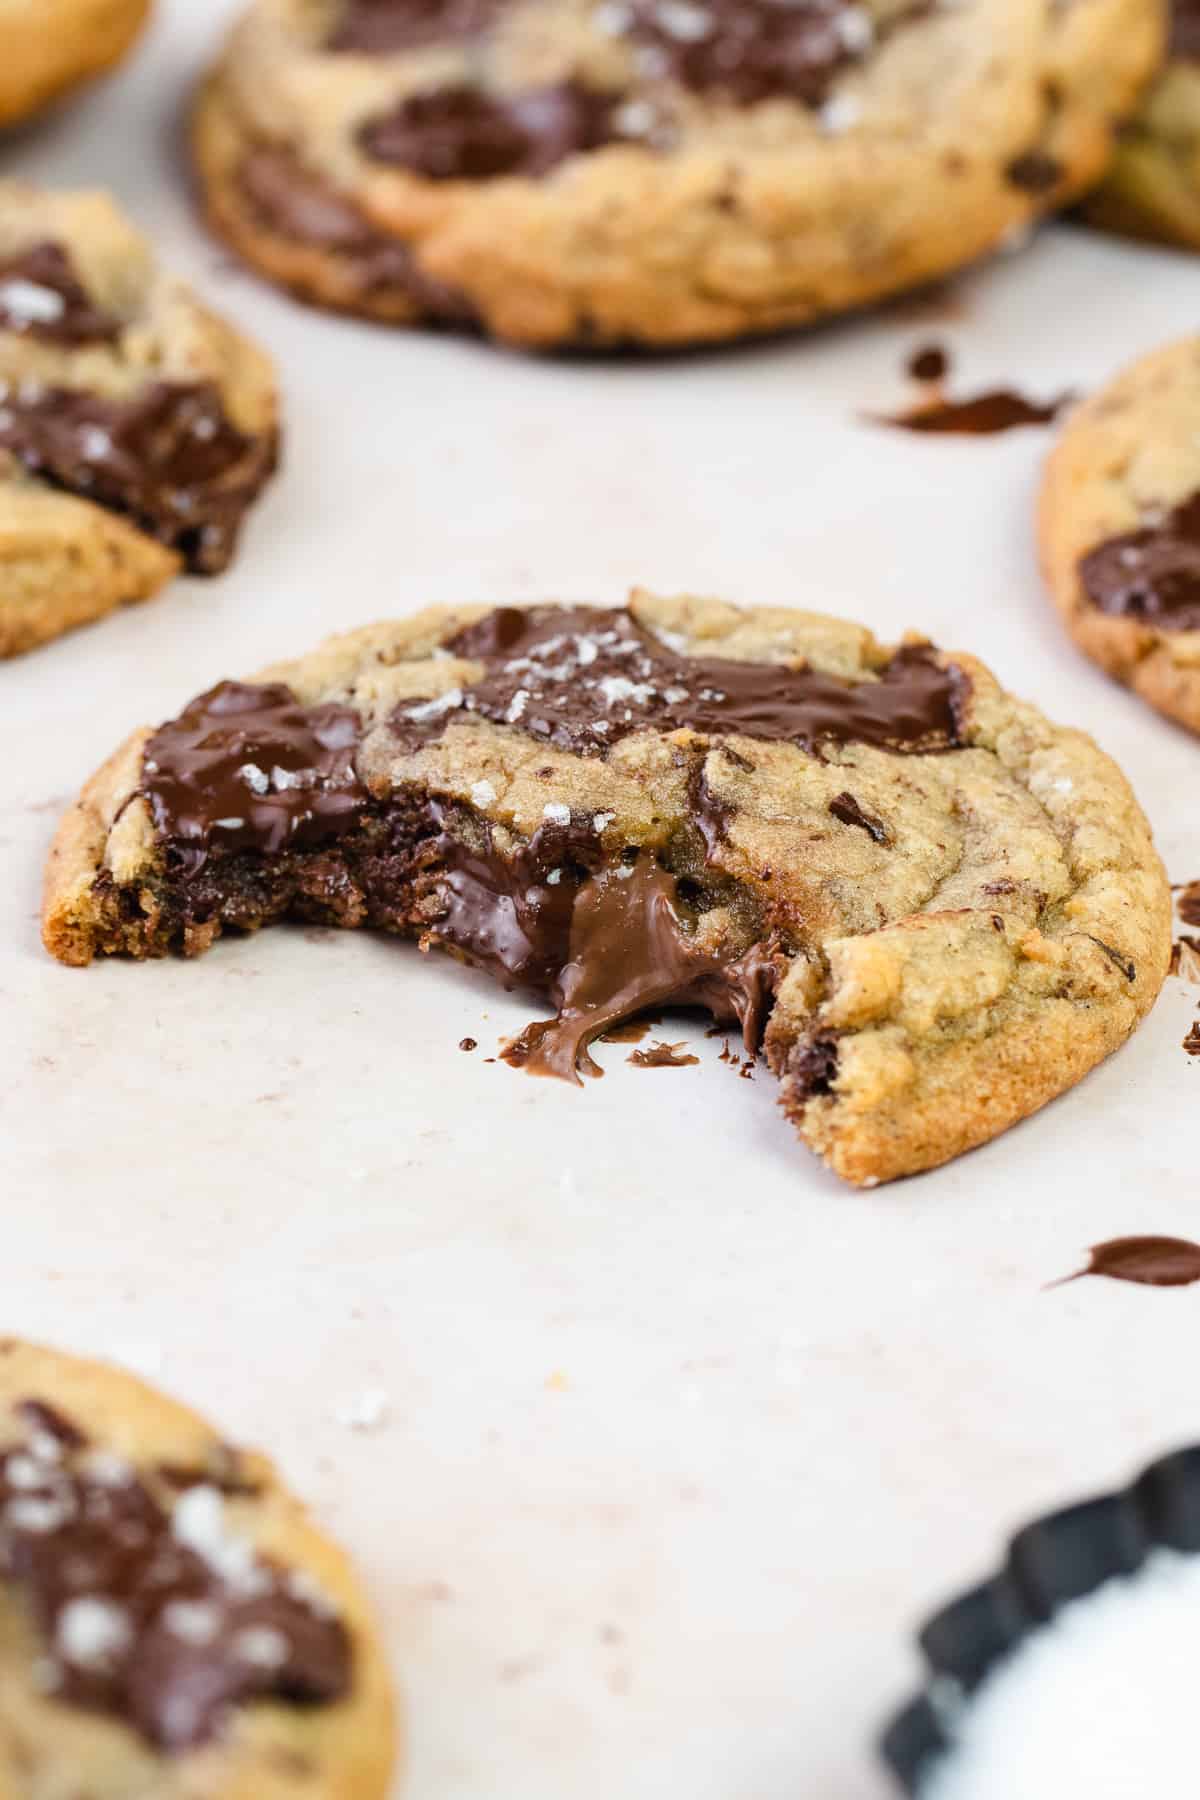 Close up of Nutella Chocolate Chip Cookie with two bites taken out of it